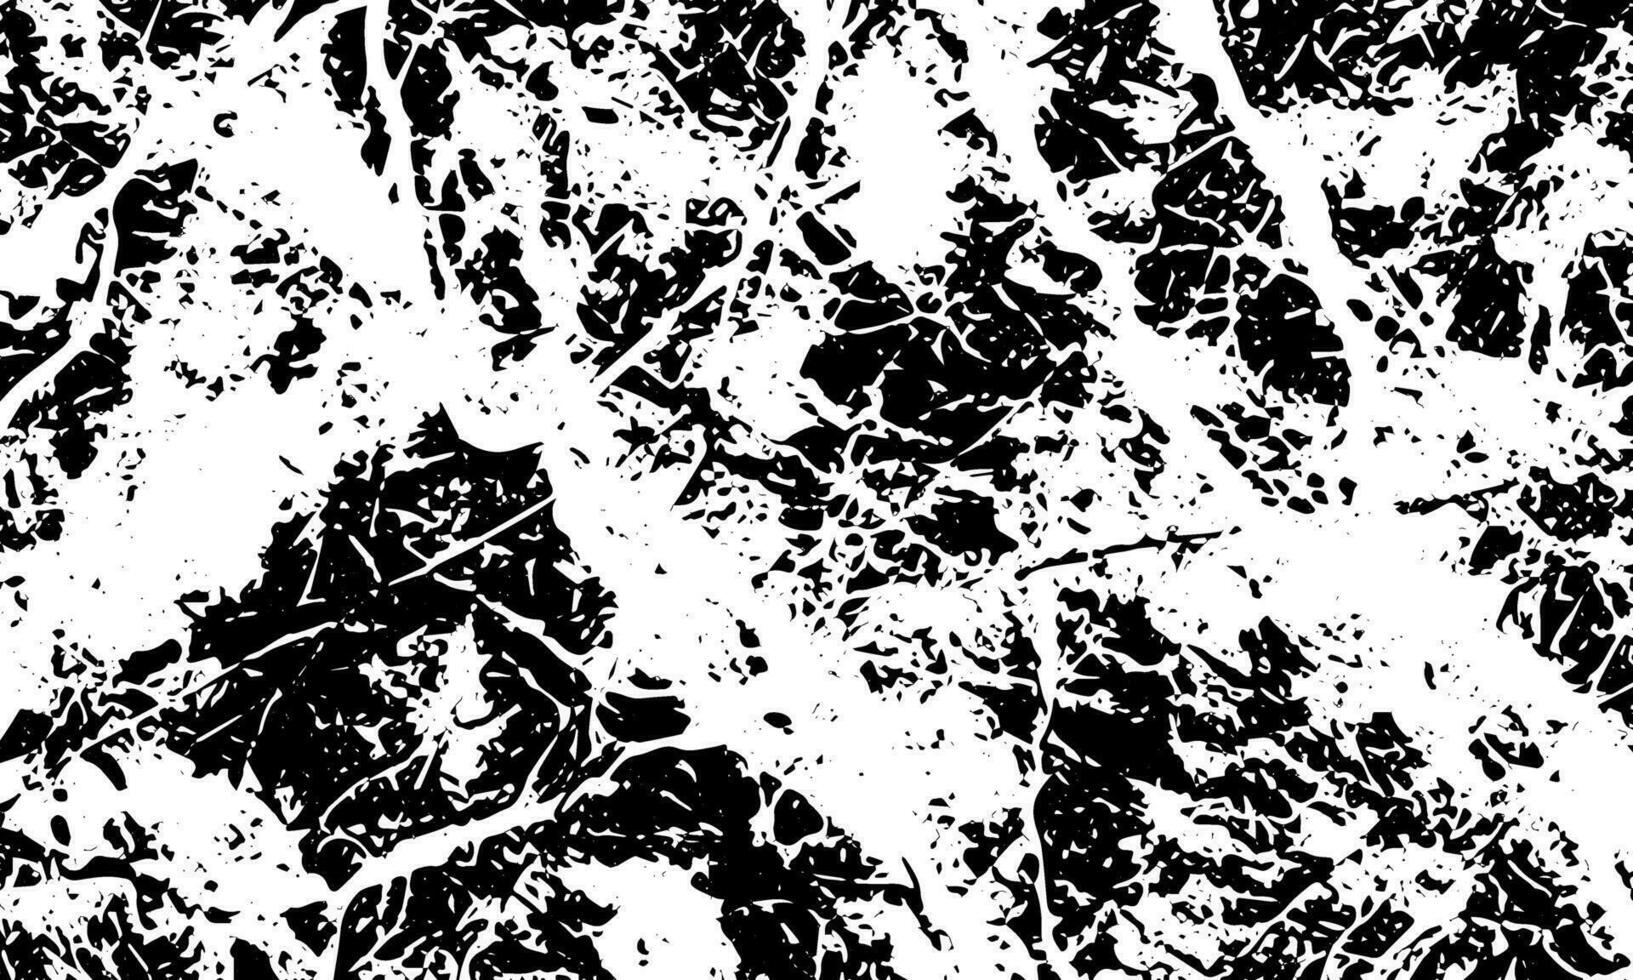 black and white marble texture background vector